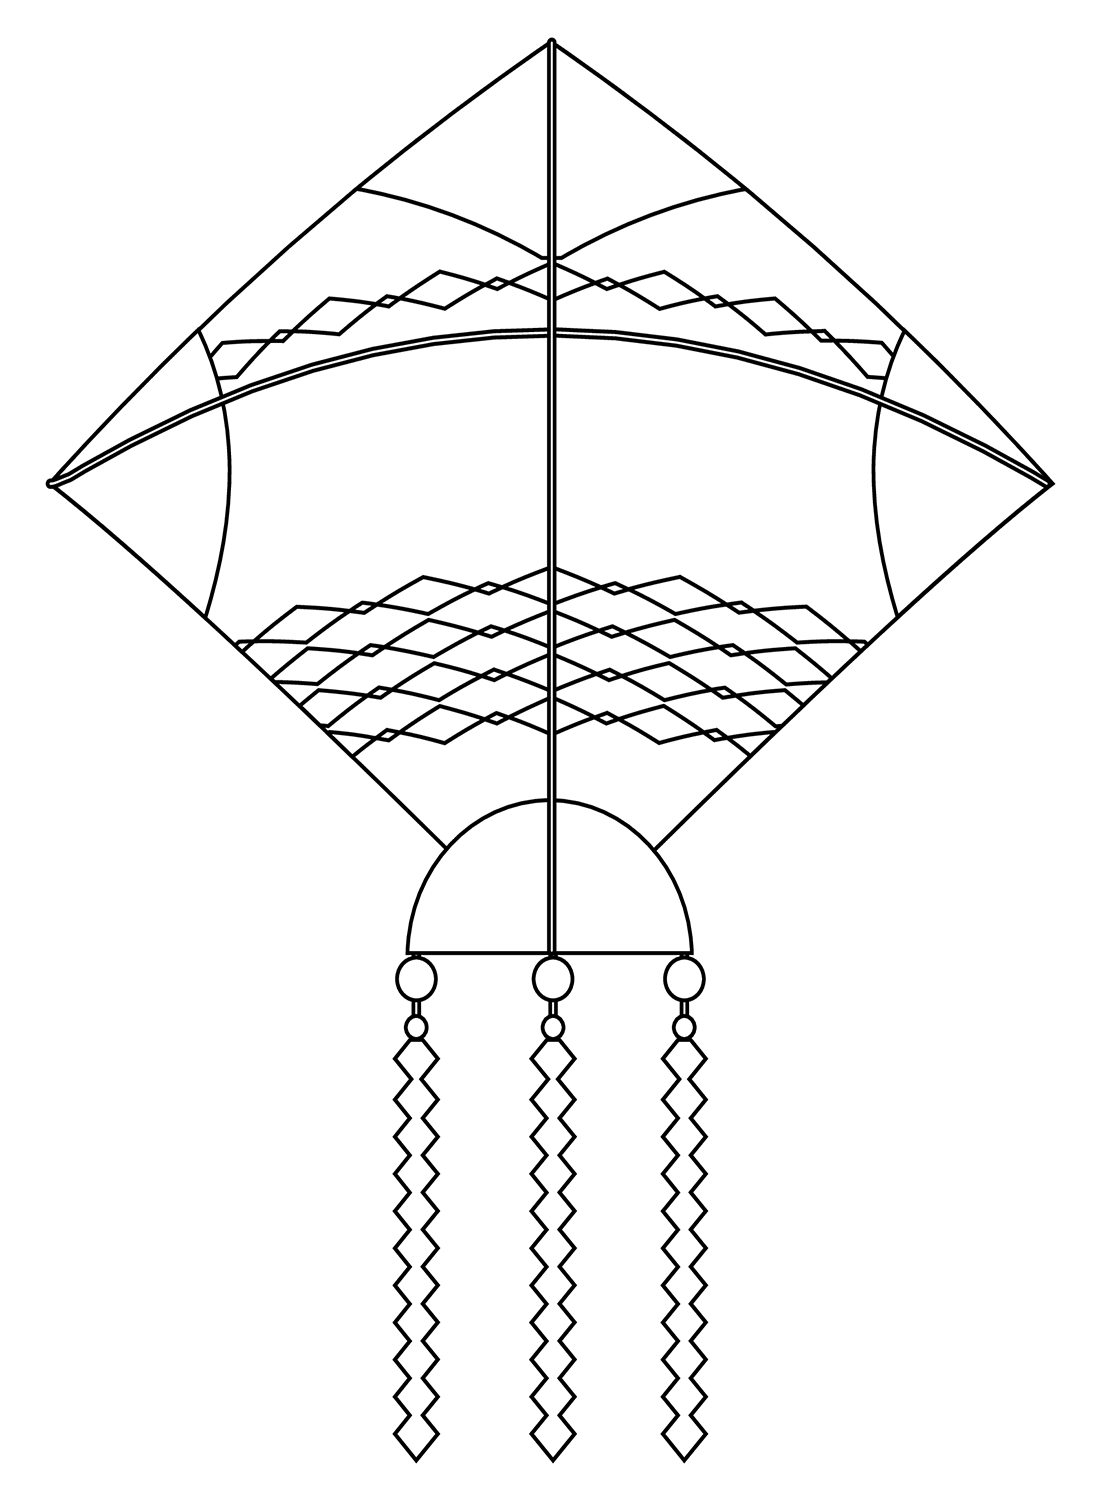 Kite color Sheets Coloring Page